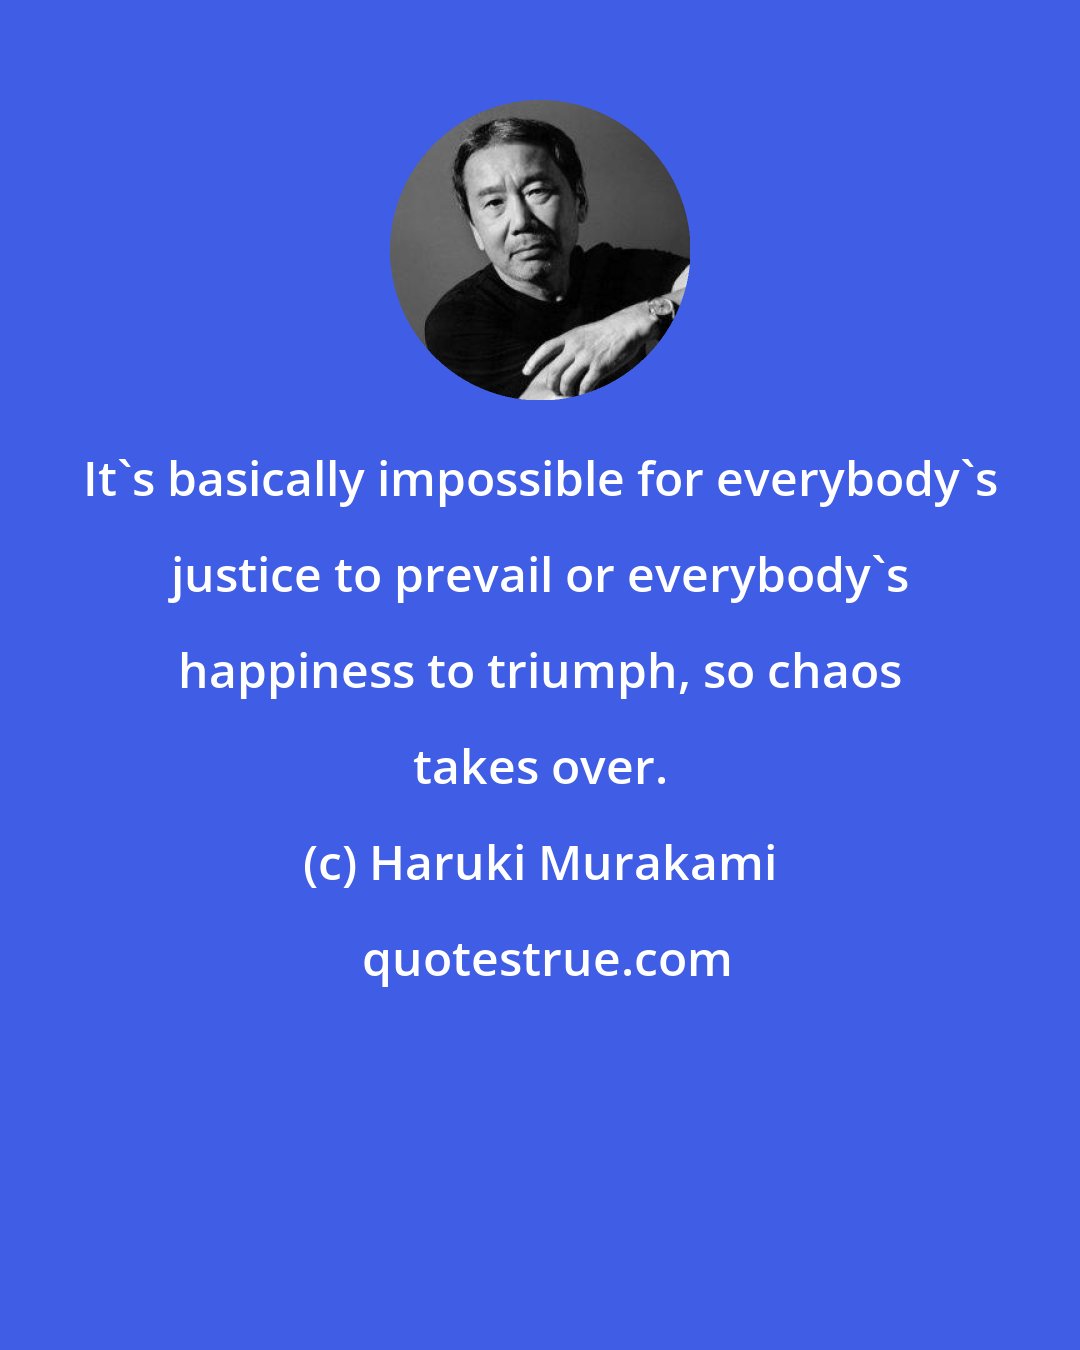 Haruki Murakami: It's basically impossible for everybody's justice to prevail or everybody's happiness to triumph, so chaos takes over.